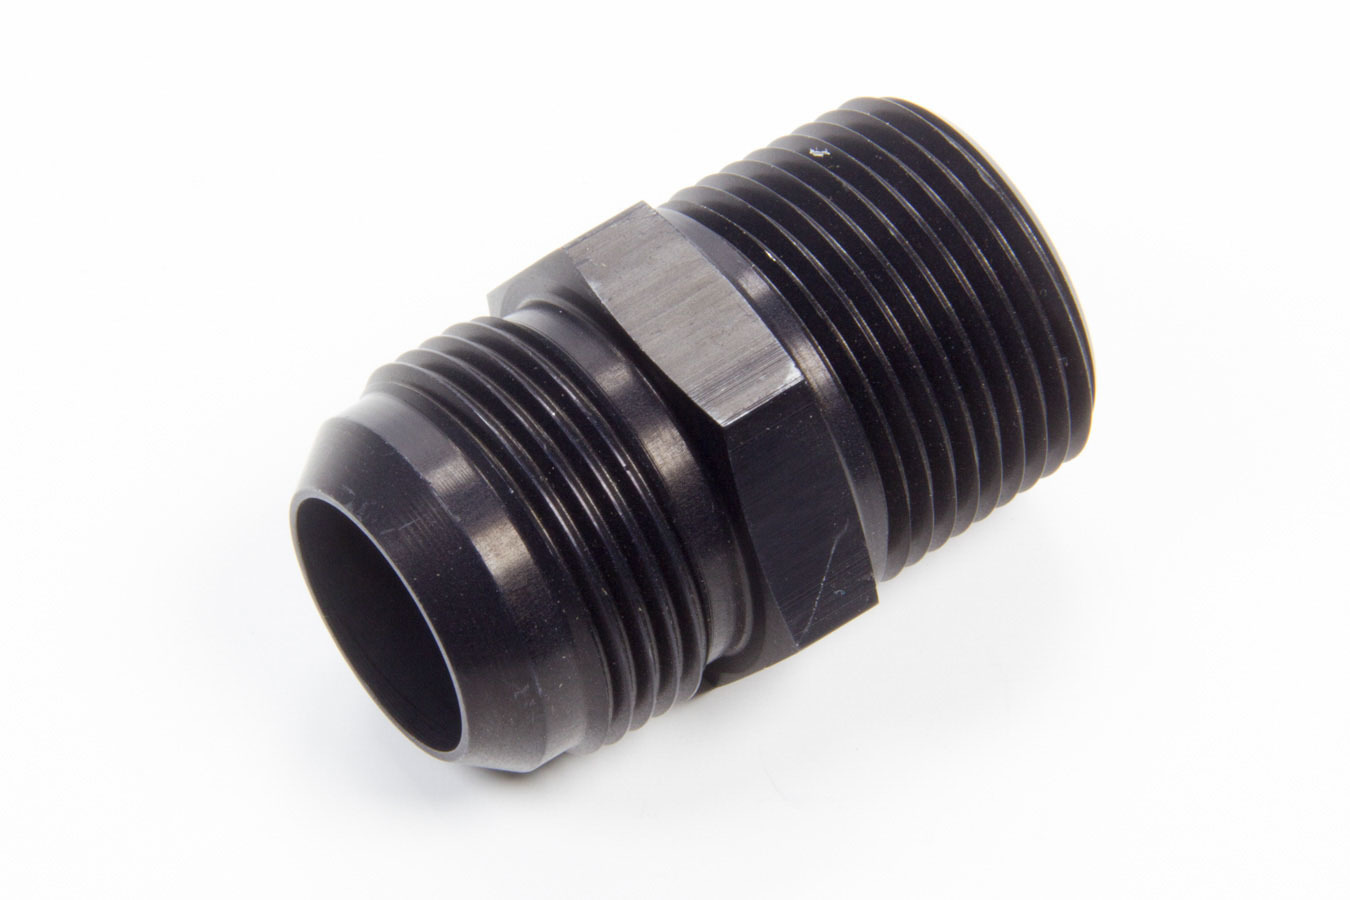 Aeroquip FCM5012 Fitting, Adapter, Straight, 16 AN Male to 1 in NPT Male, Aluminum, Black Anodized, Each